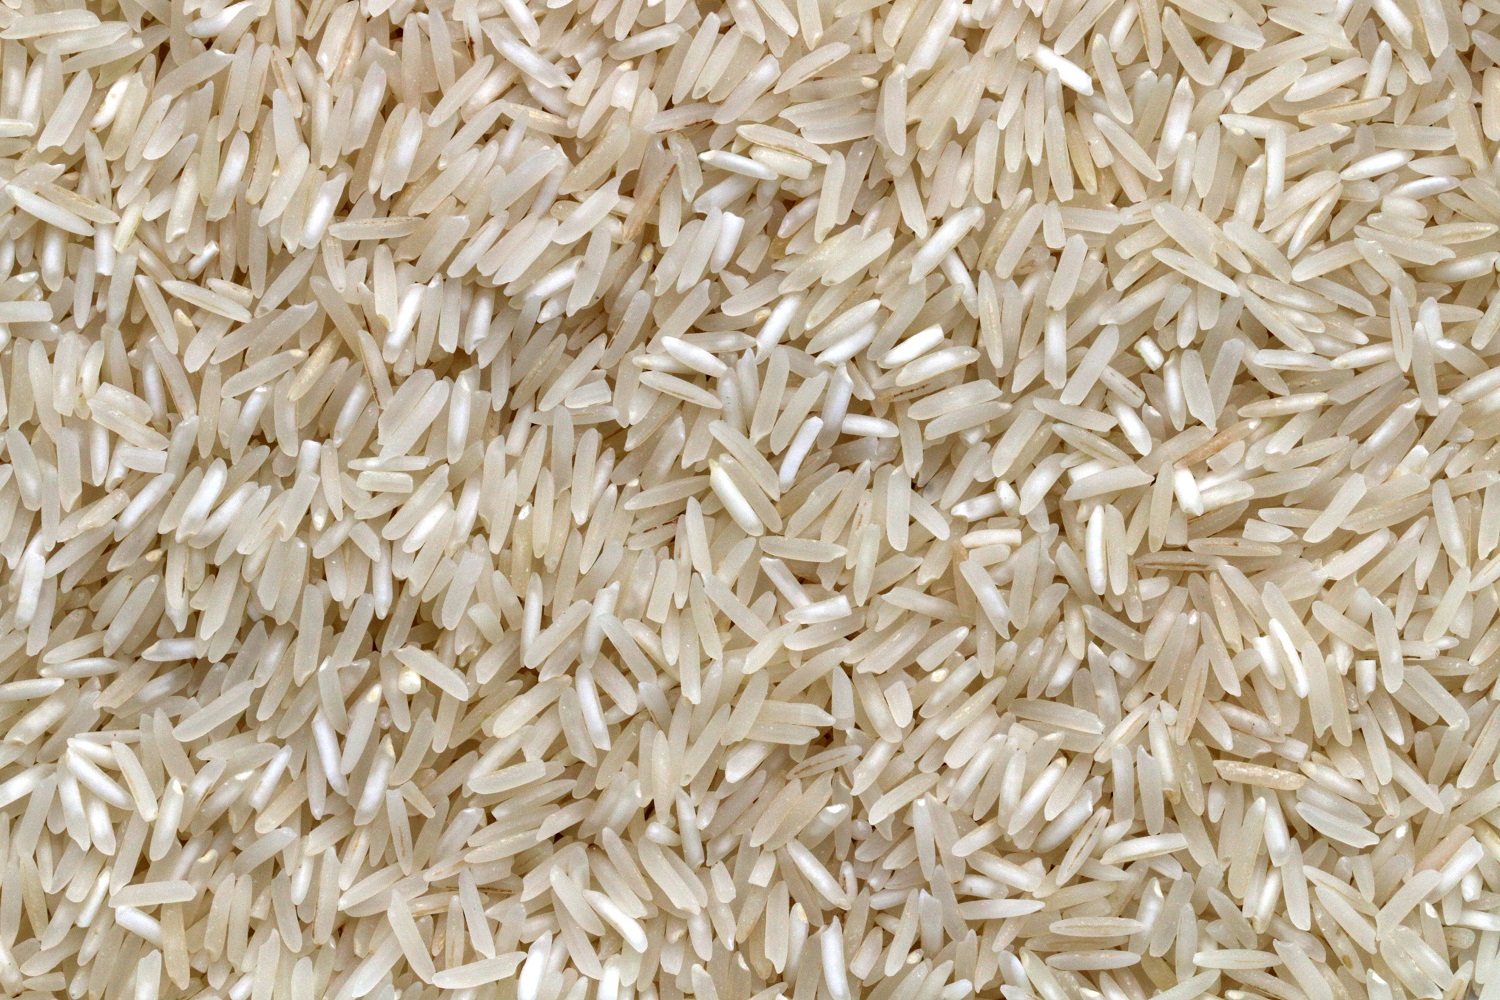 Too Much Rice Could Kill, Study Shows